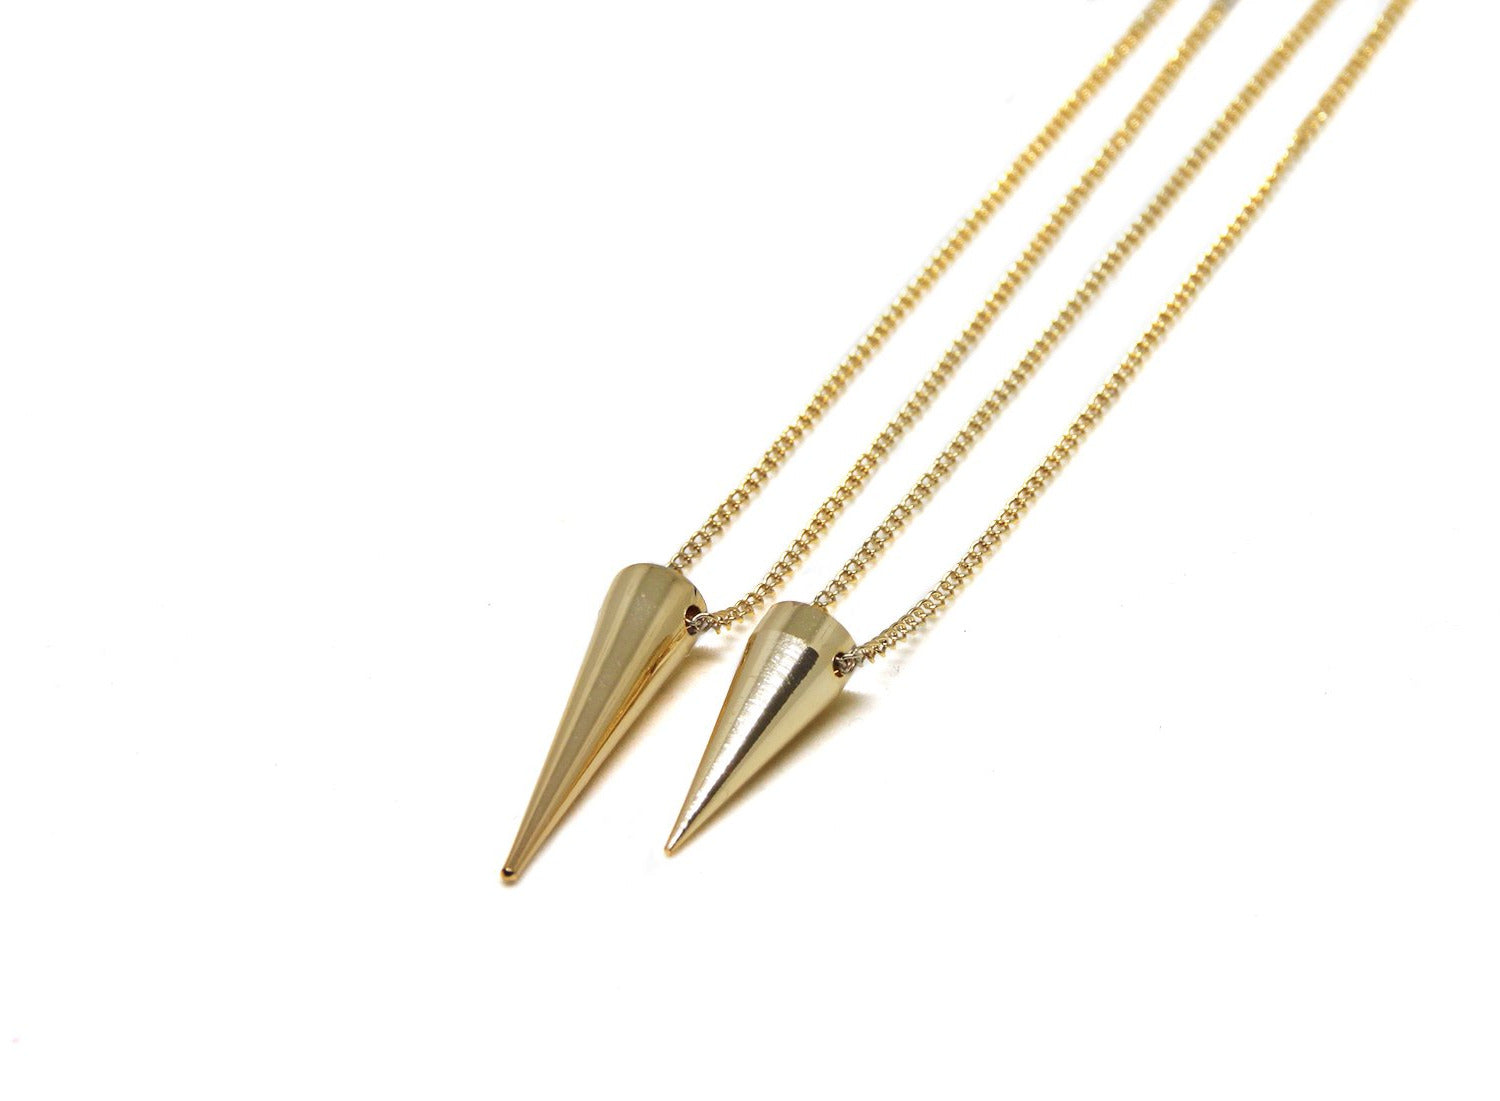 llayers jewelry necklace gold punk spike collier pointe or fait main